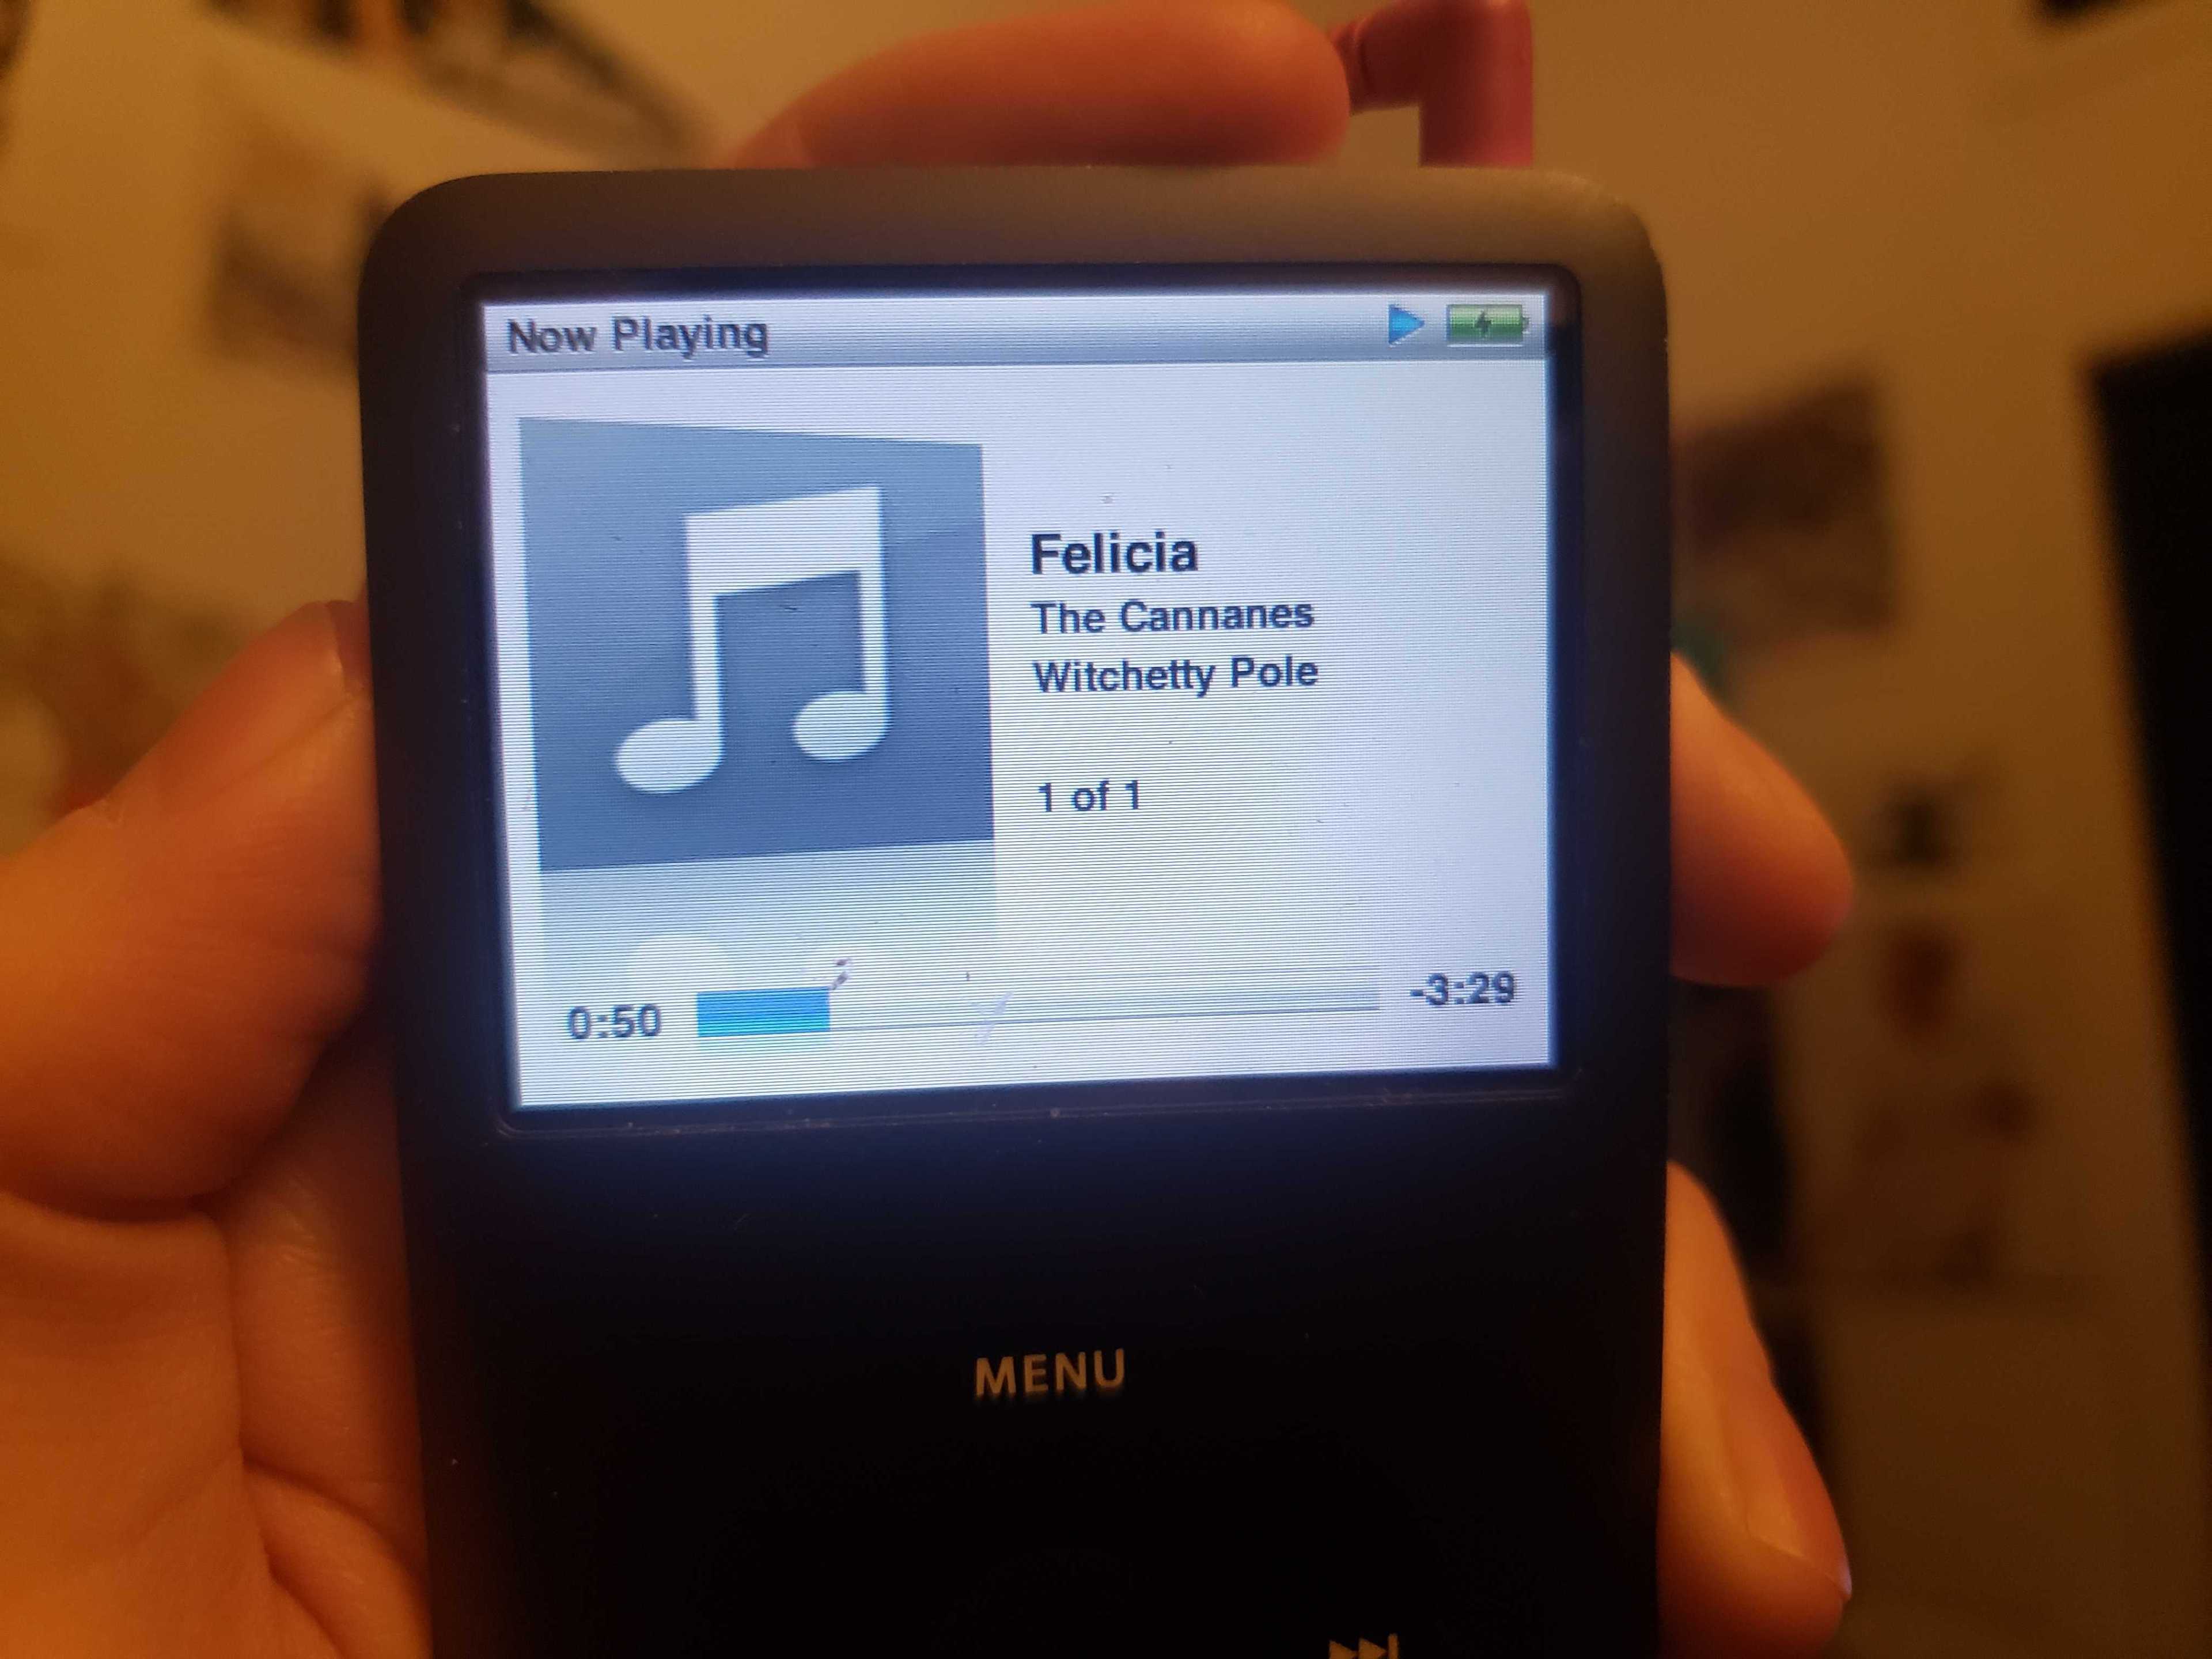 "Felicia" by The Cannanes on an old iPod